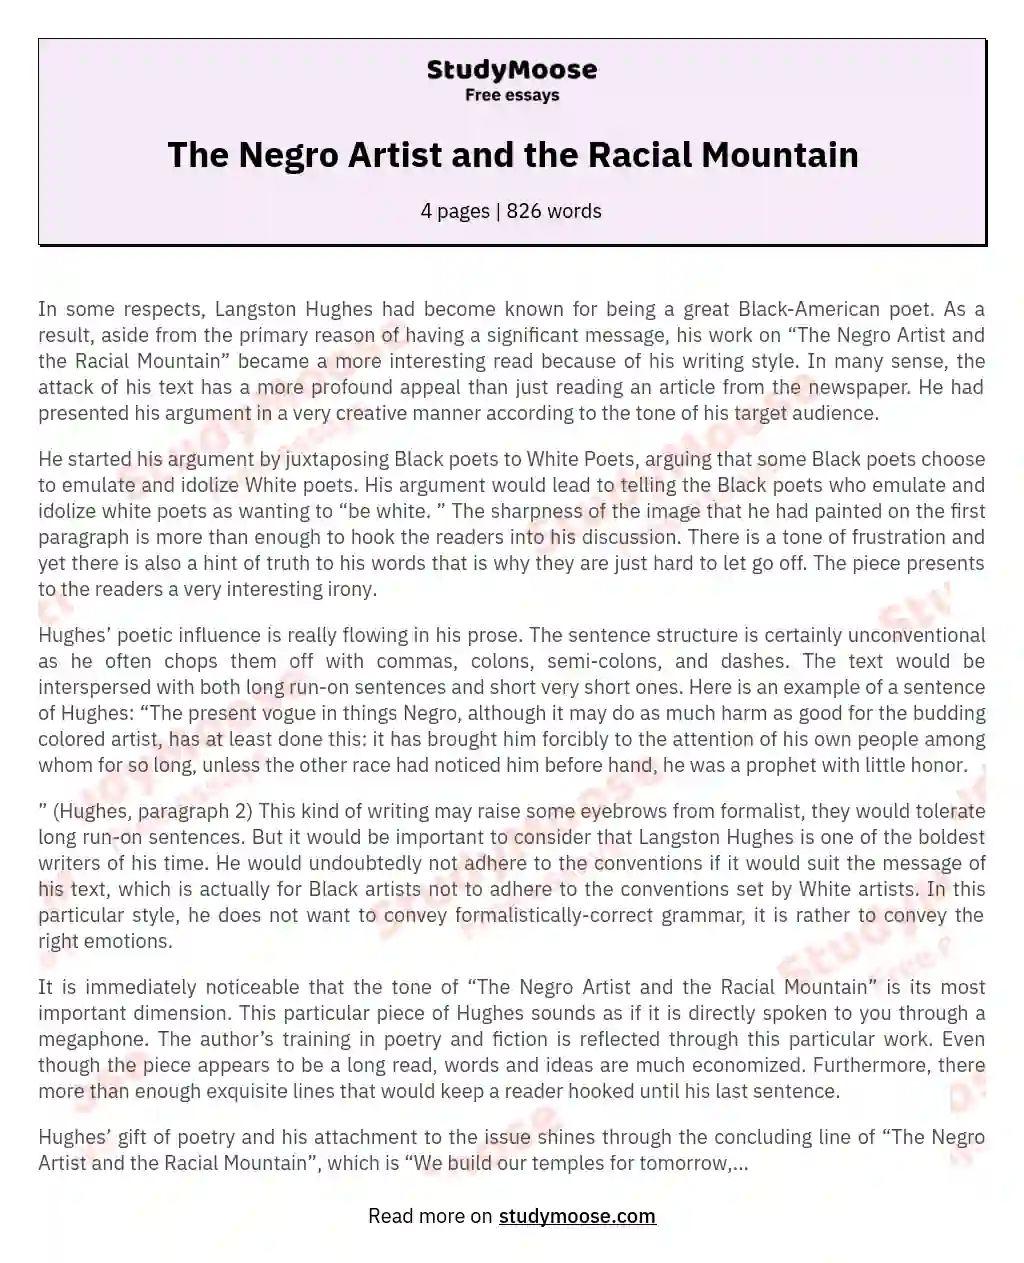 The Negro Artist and the Racial Mountain essay